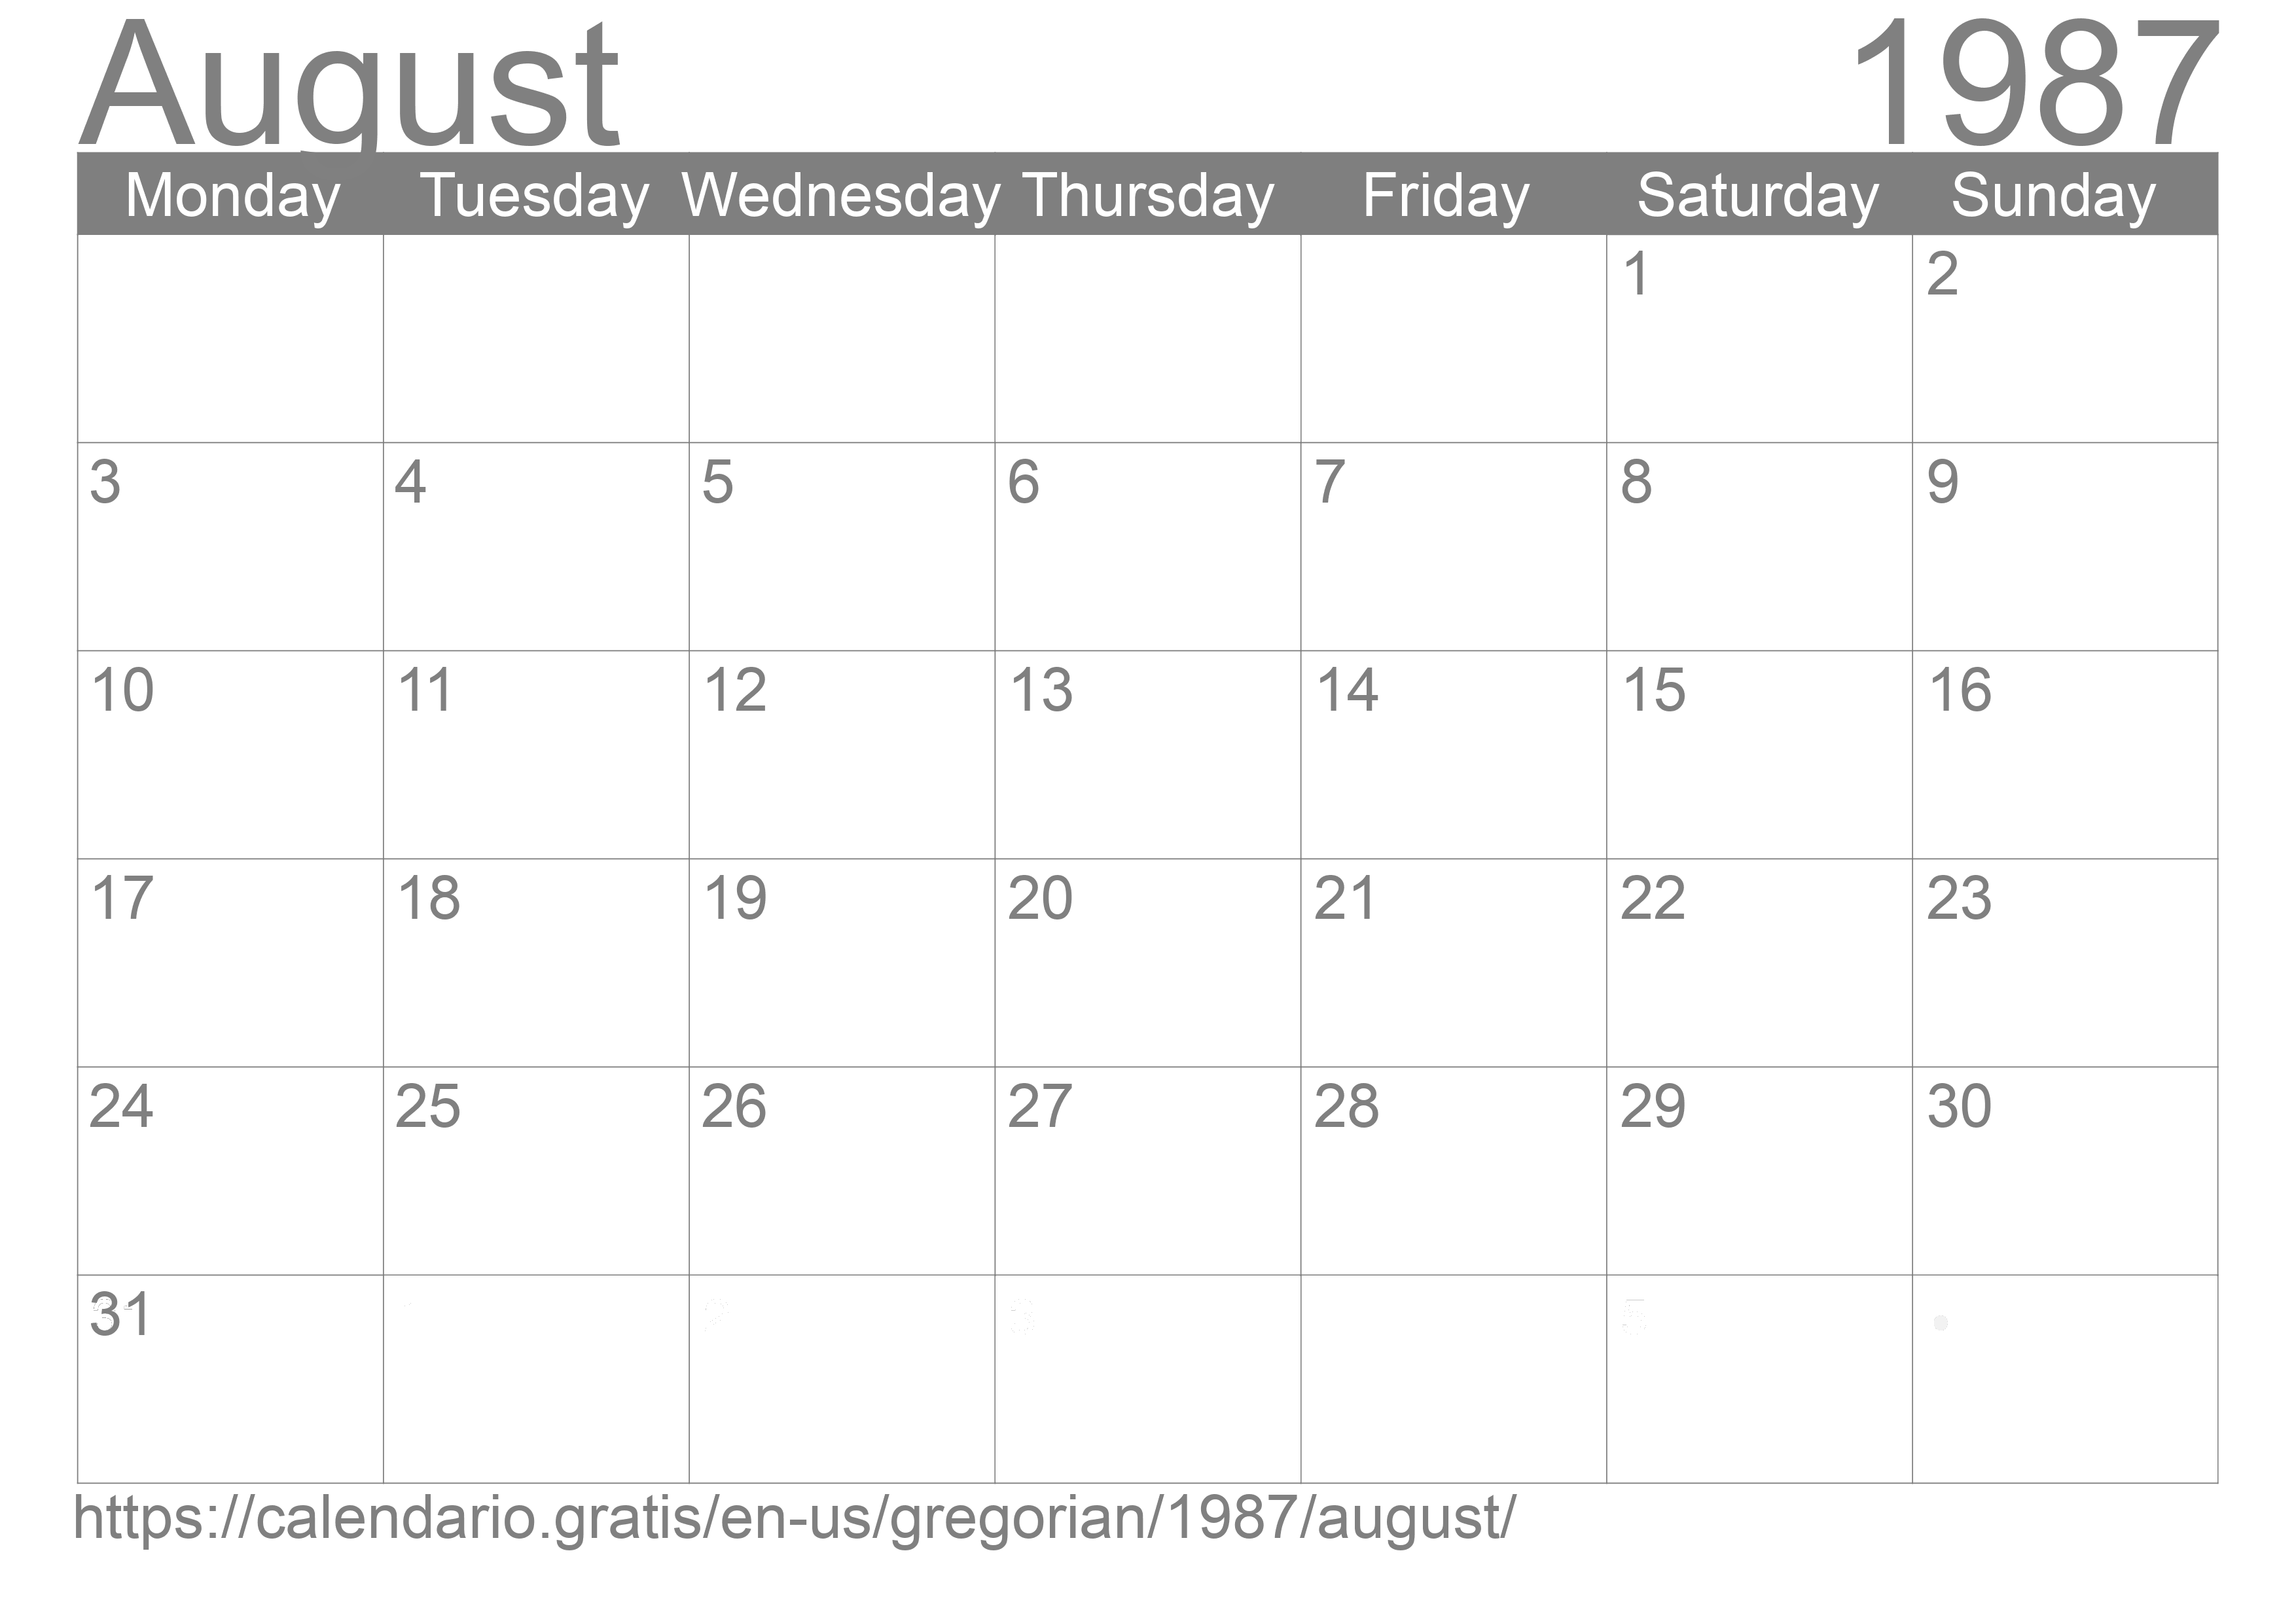 Calendar August 1987 from United States of America in English: Holidays